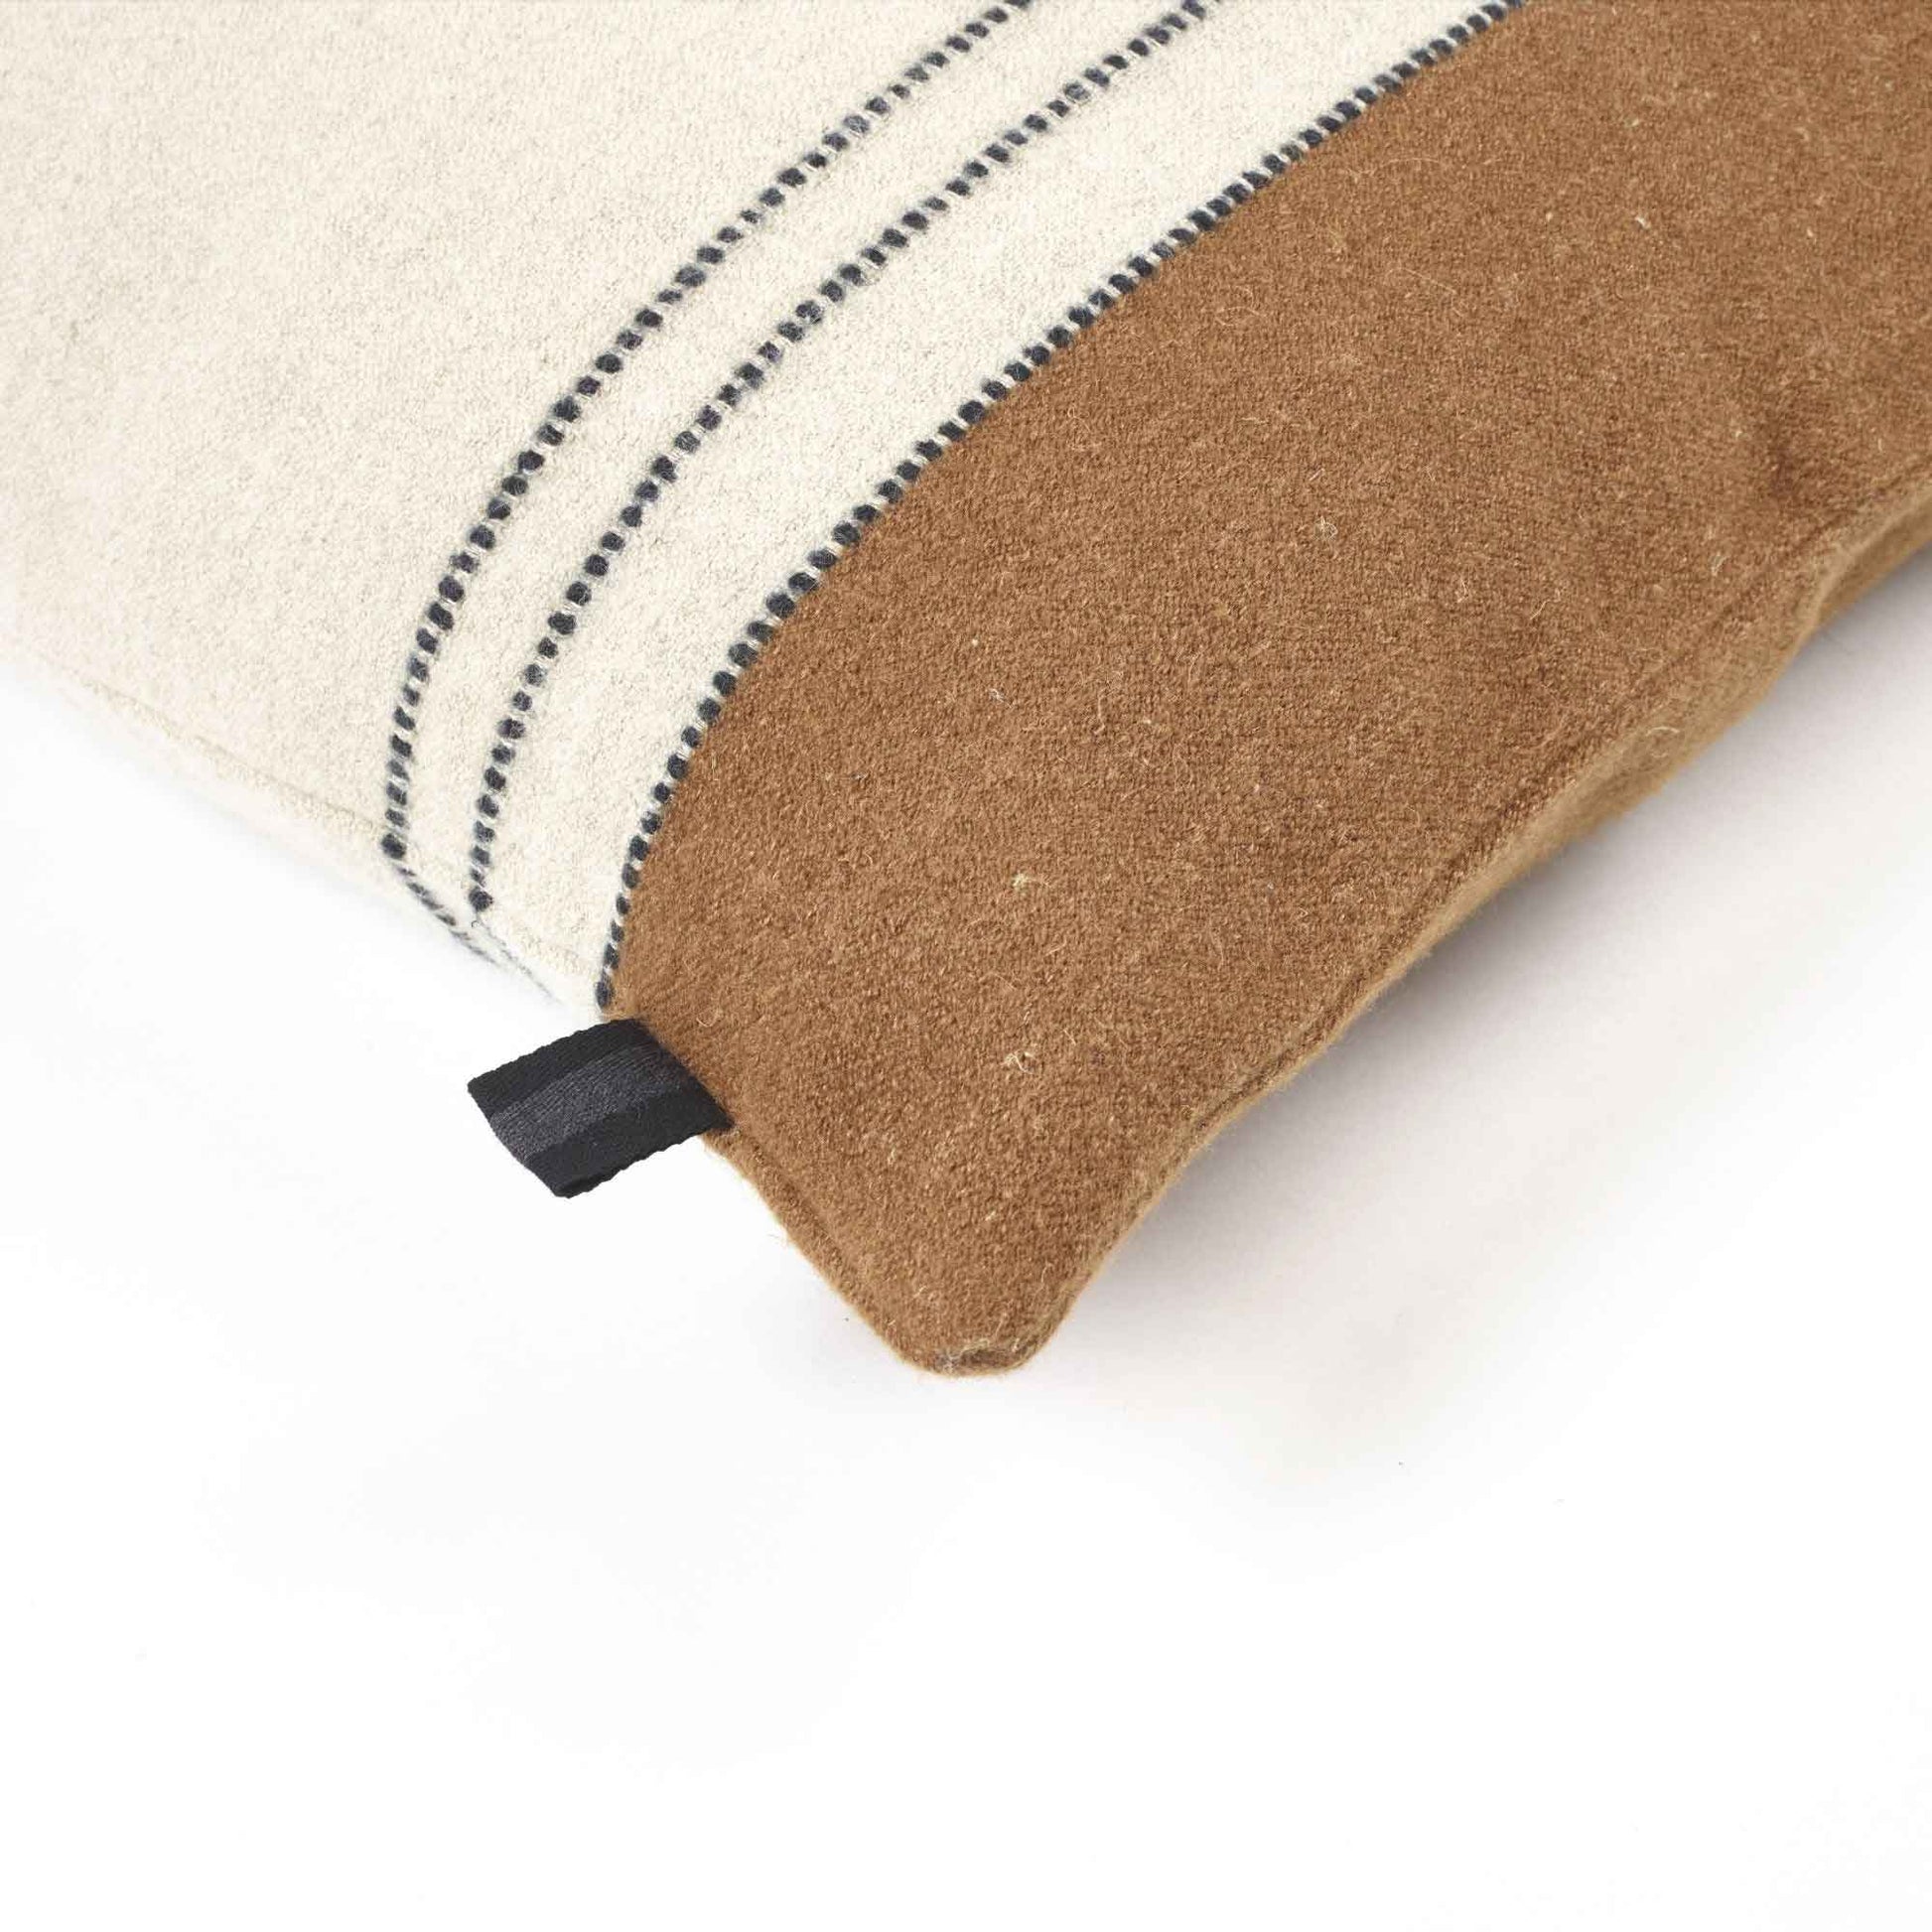 Linen and wool blend throw pillow cover corner detail shot in color Foundry by Libeco for South Hous.